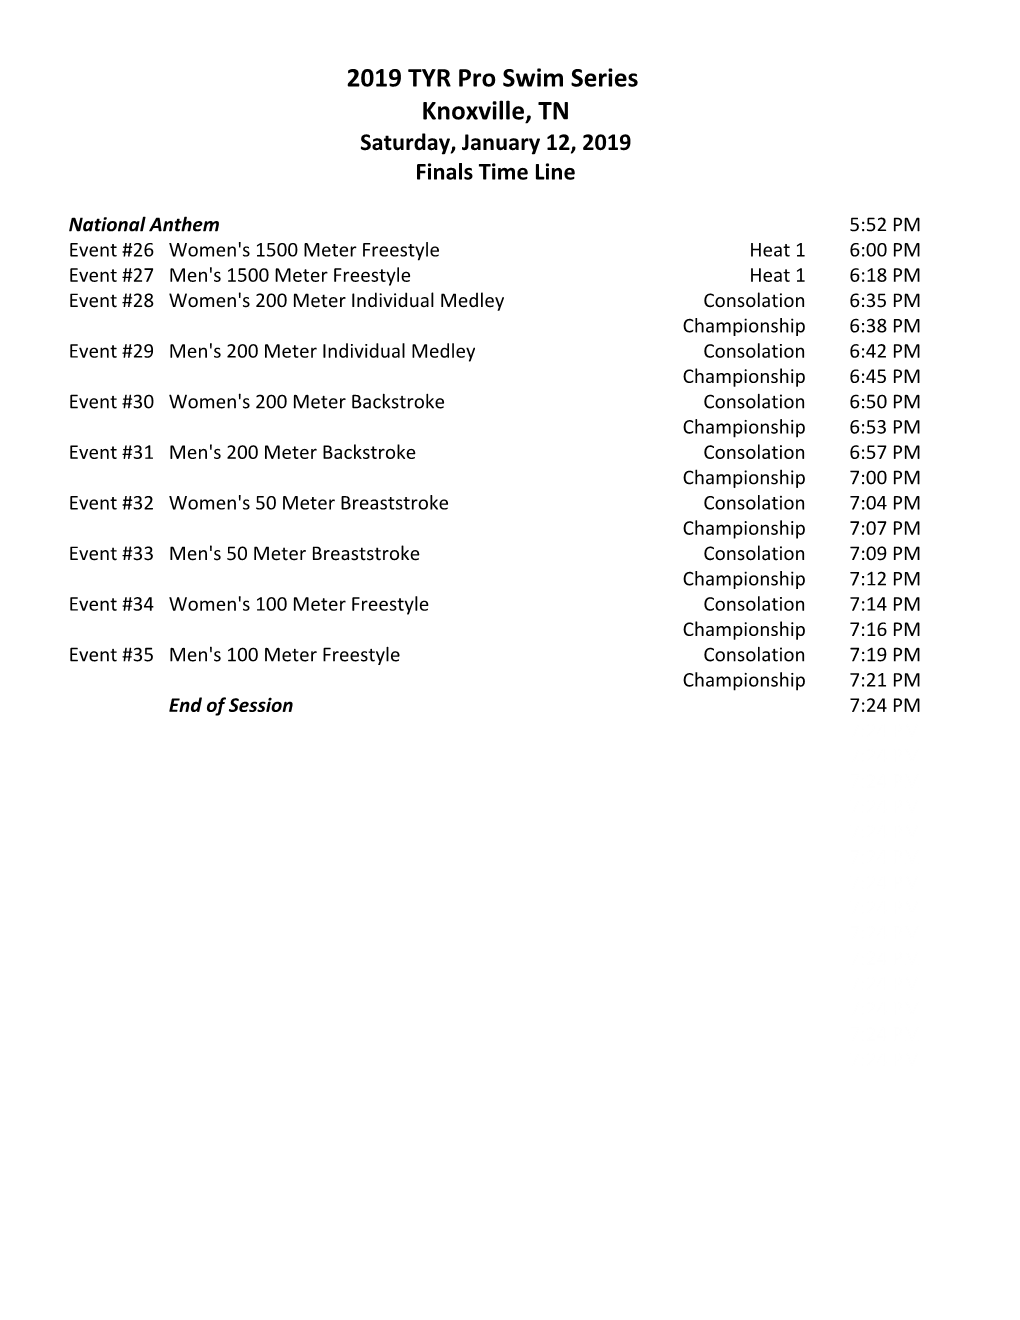 2019 TYR Pro Swim Series Knoxville, TN Saturday, January 12, 2019 Finals Time Line